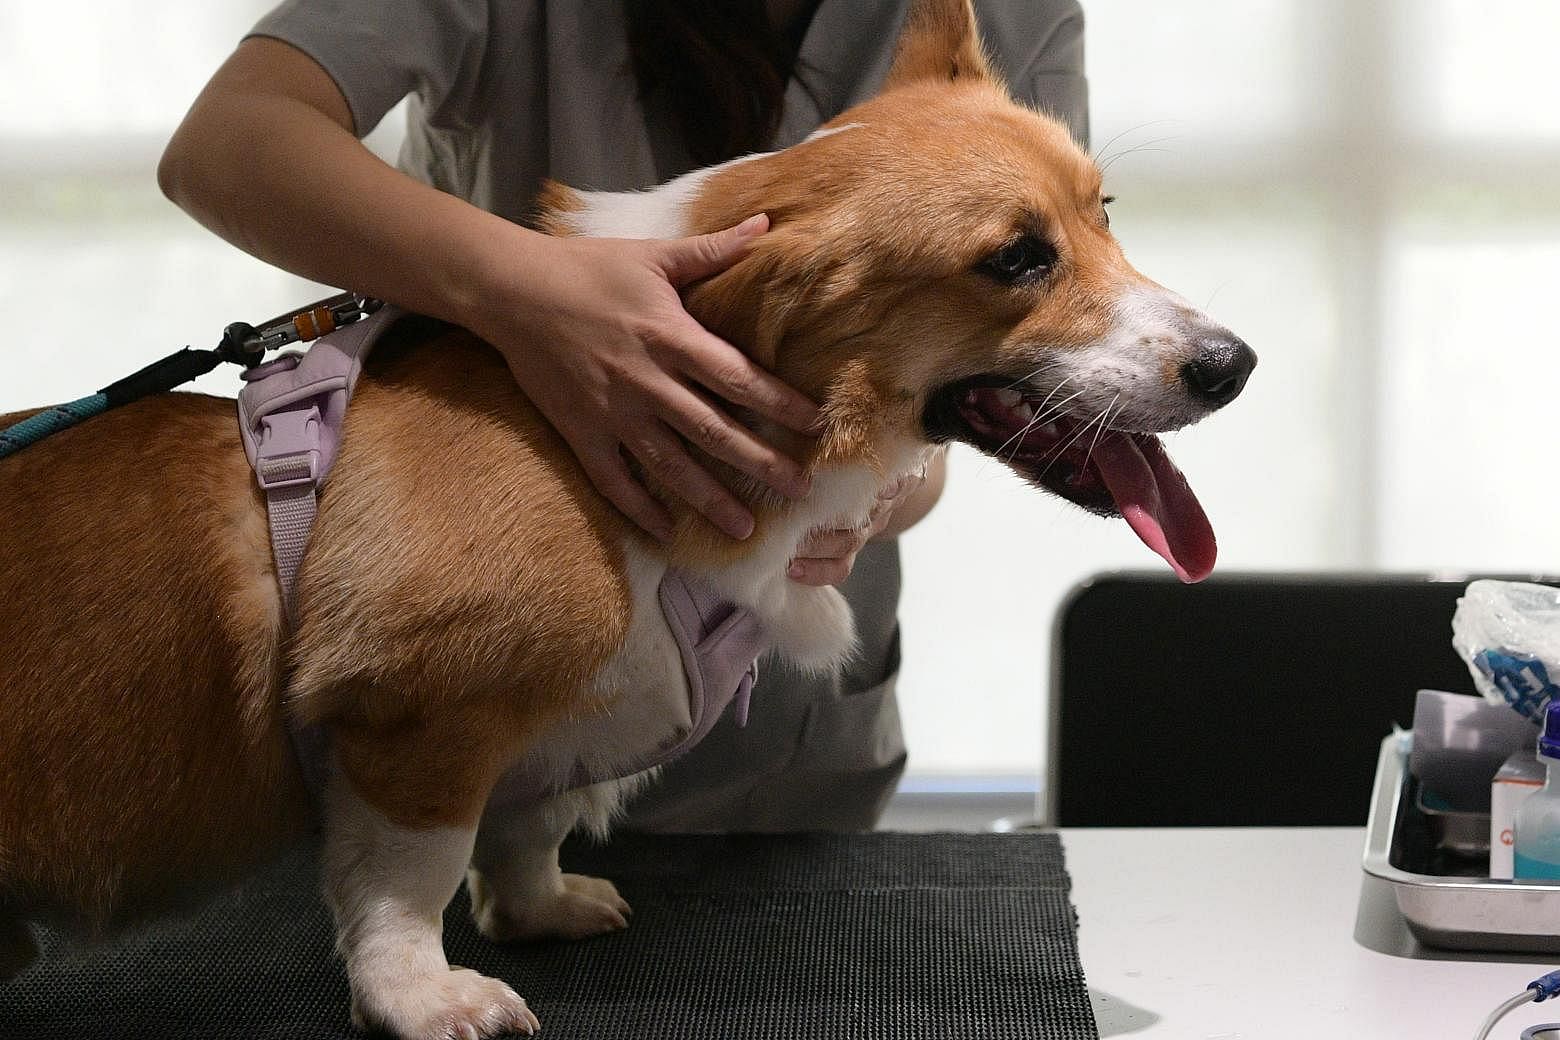 S’pore vets get new telehealth guidelines to better ensure welfare, safety of pets